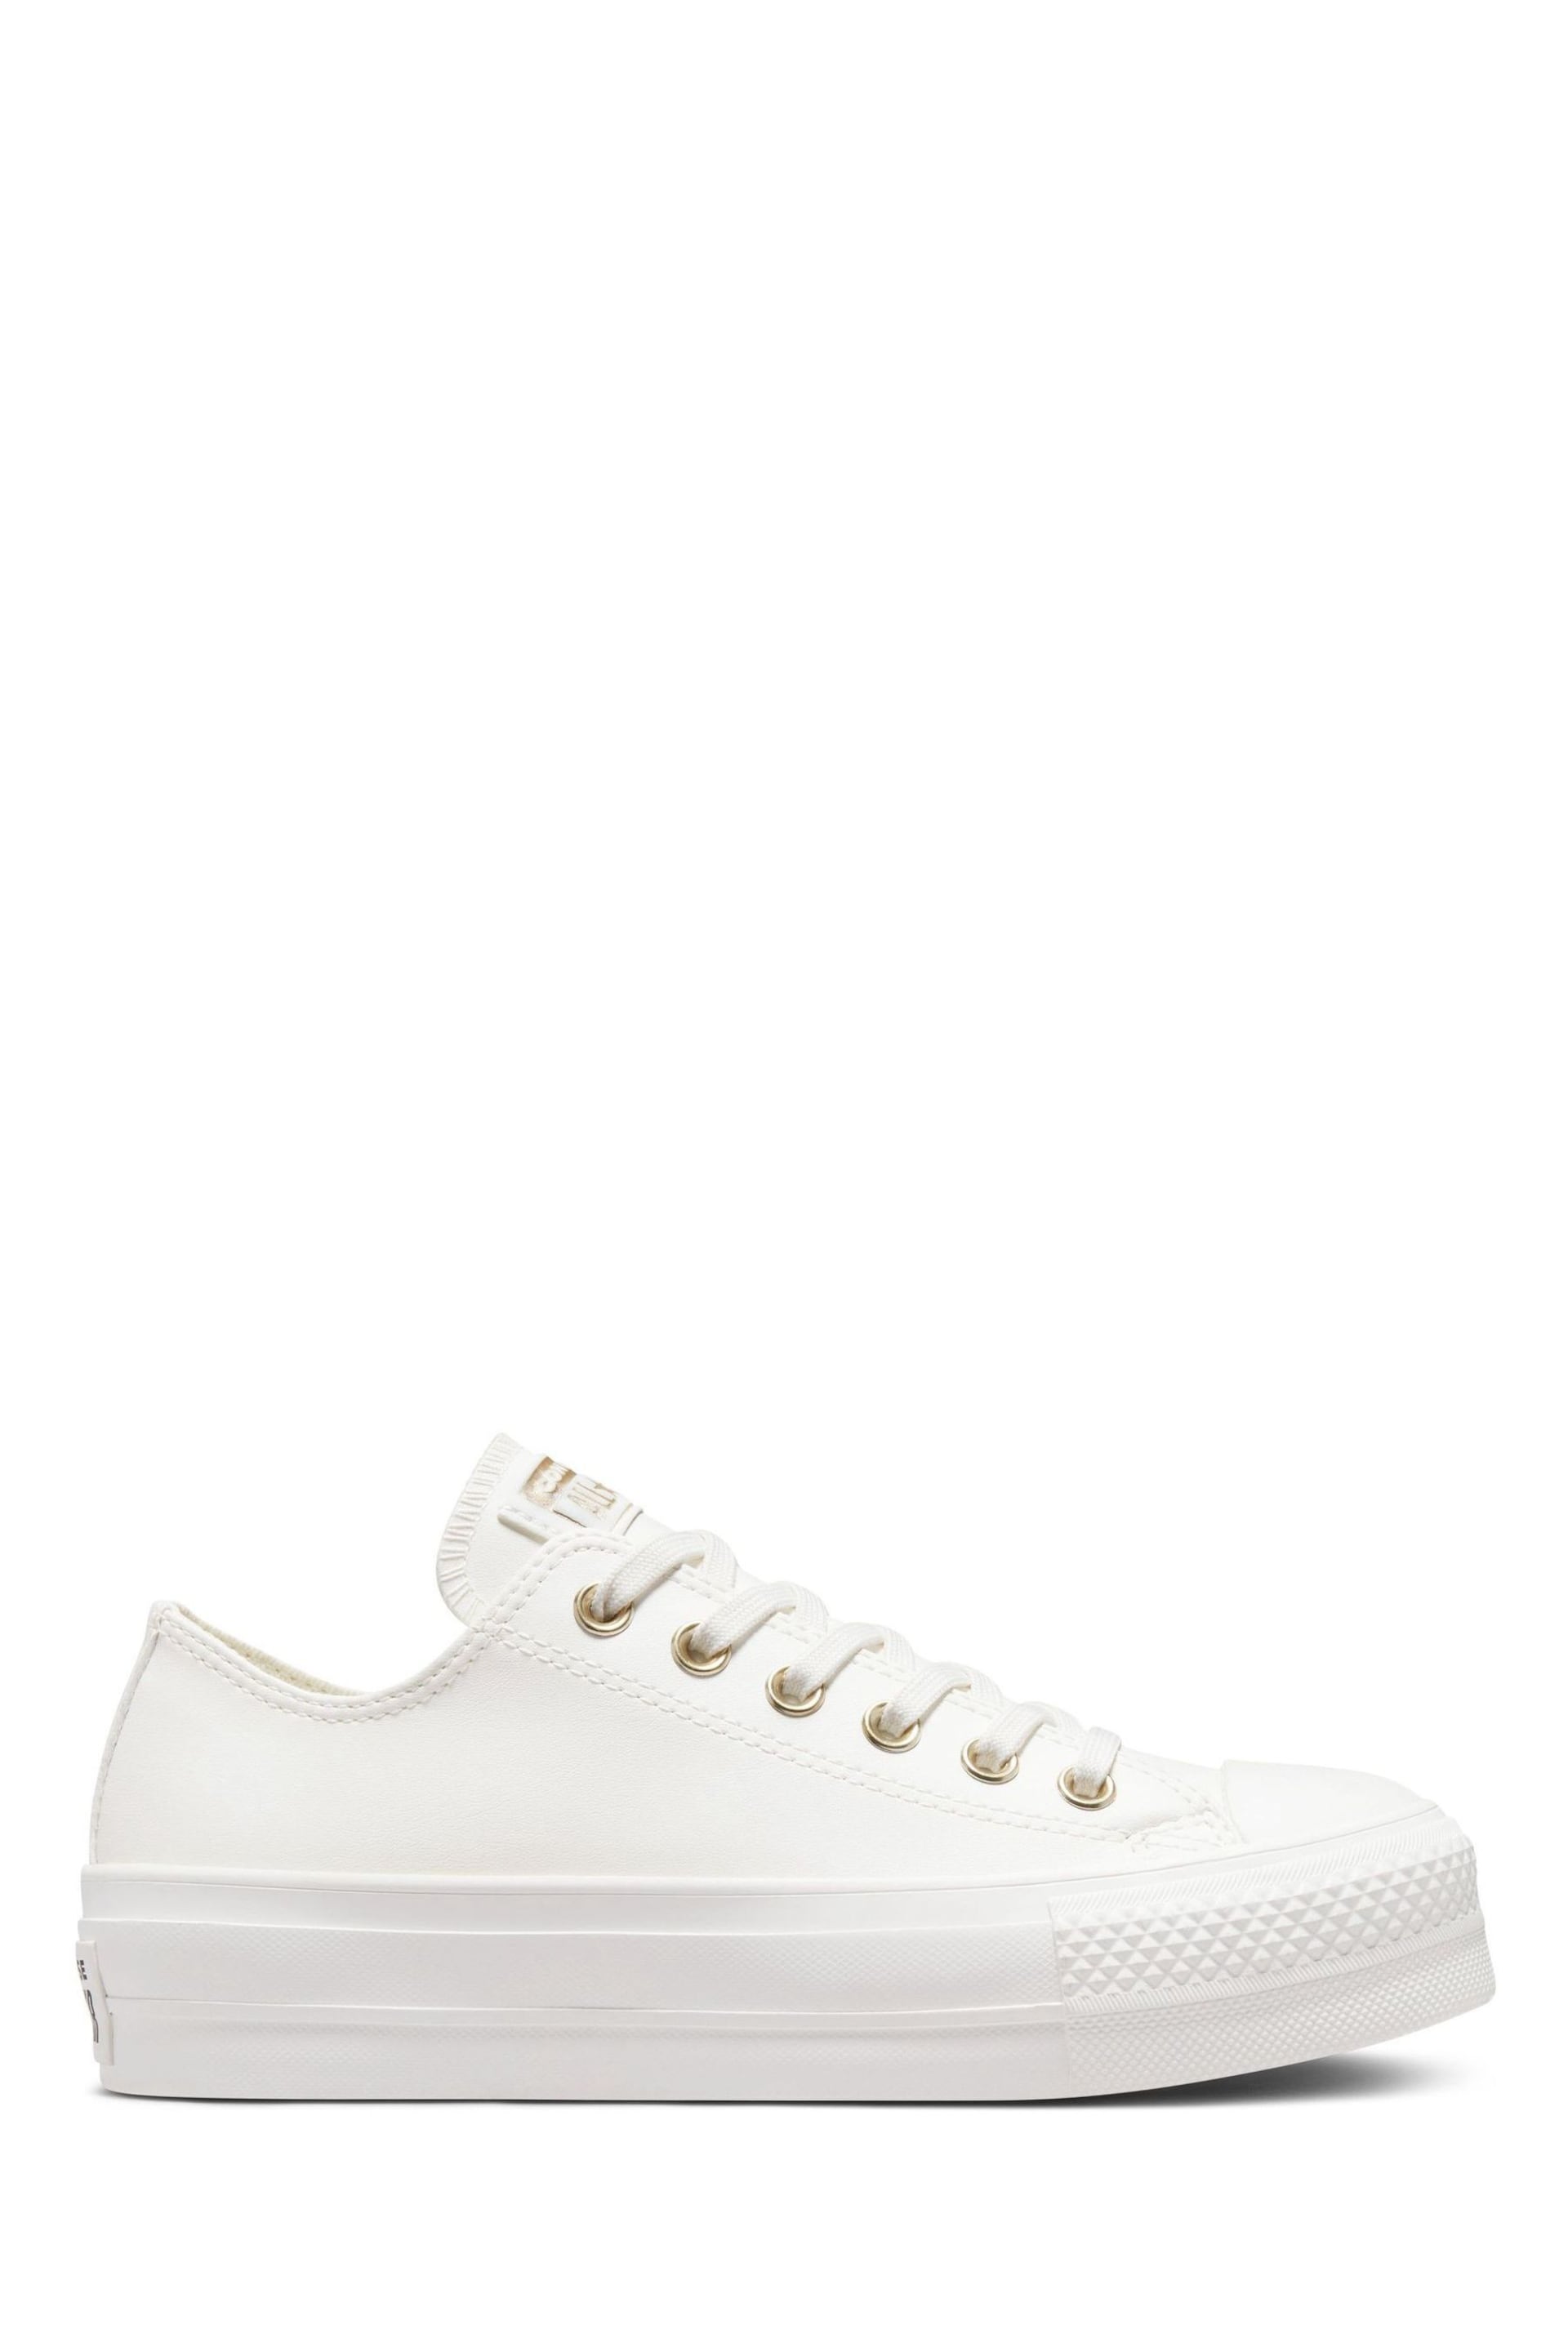 Converse White Lift Platform Low Top Trainers - Image 1 of 7